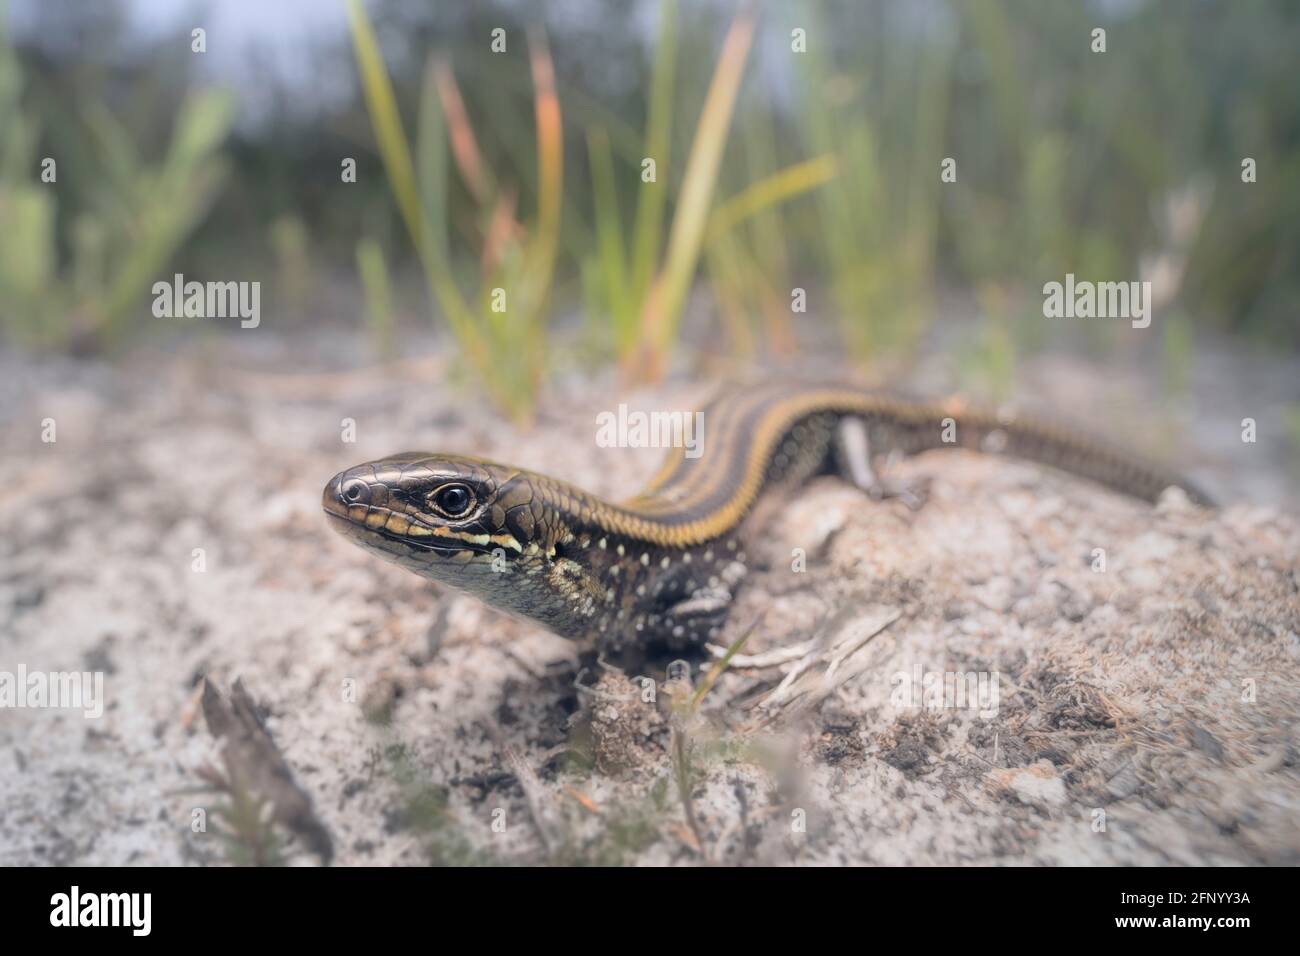 Close-up of an Eastern mourning skink (Lissolepis coventryi), Australia Stock Photo